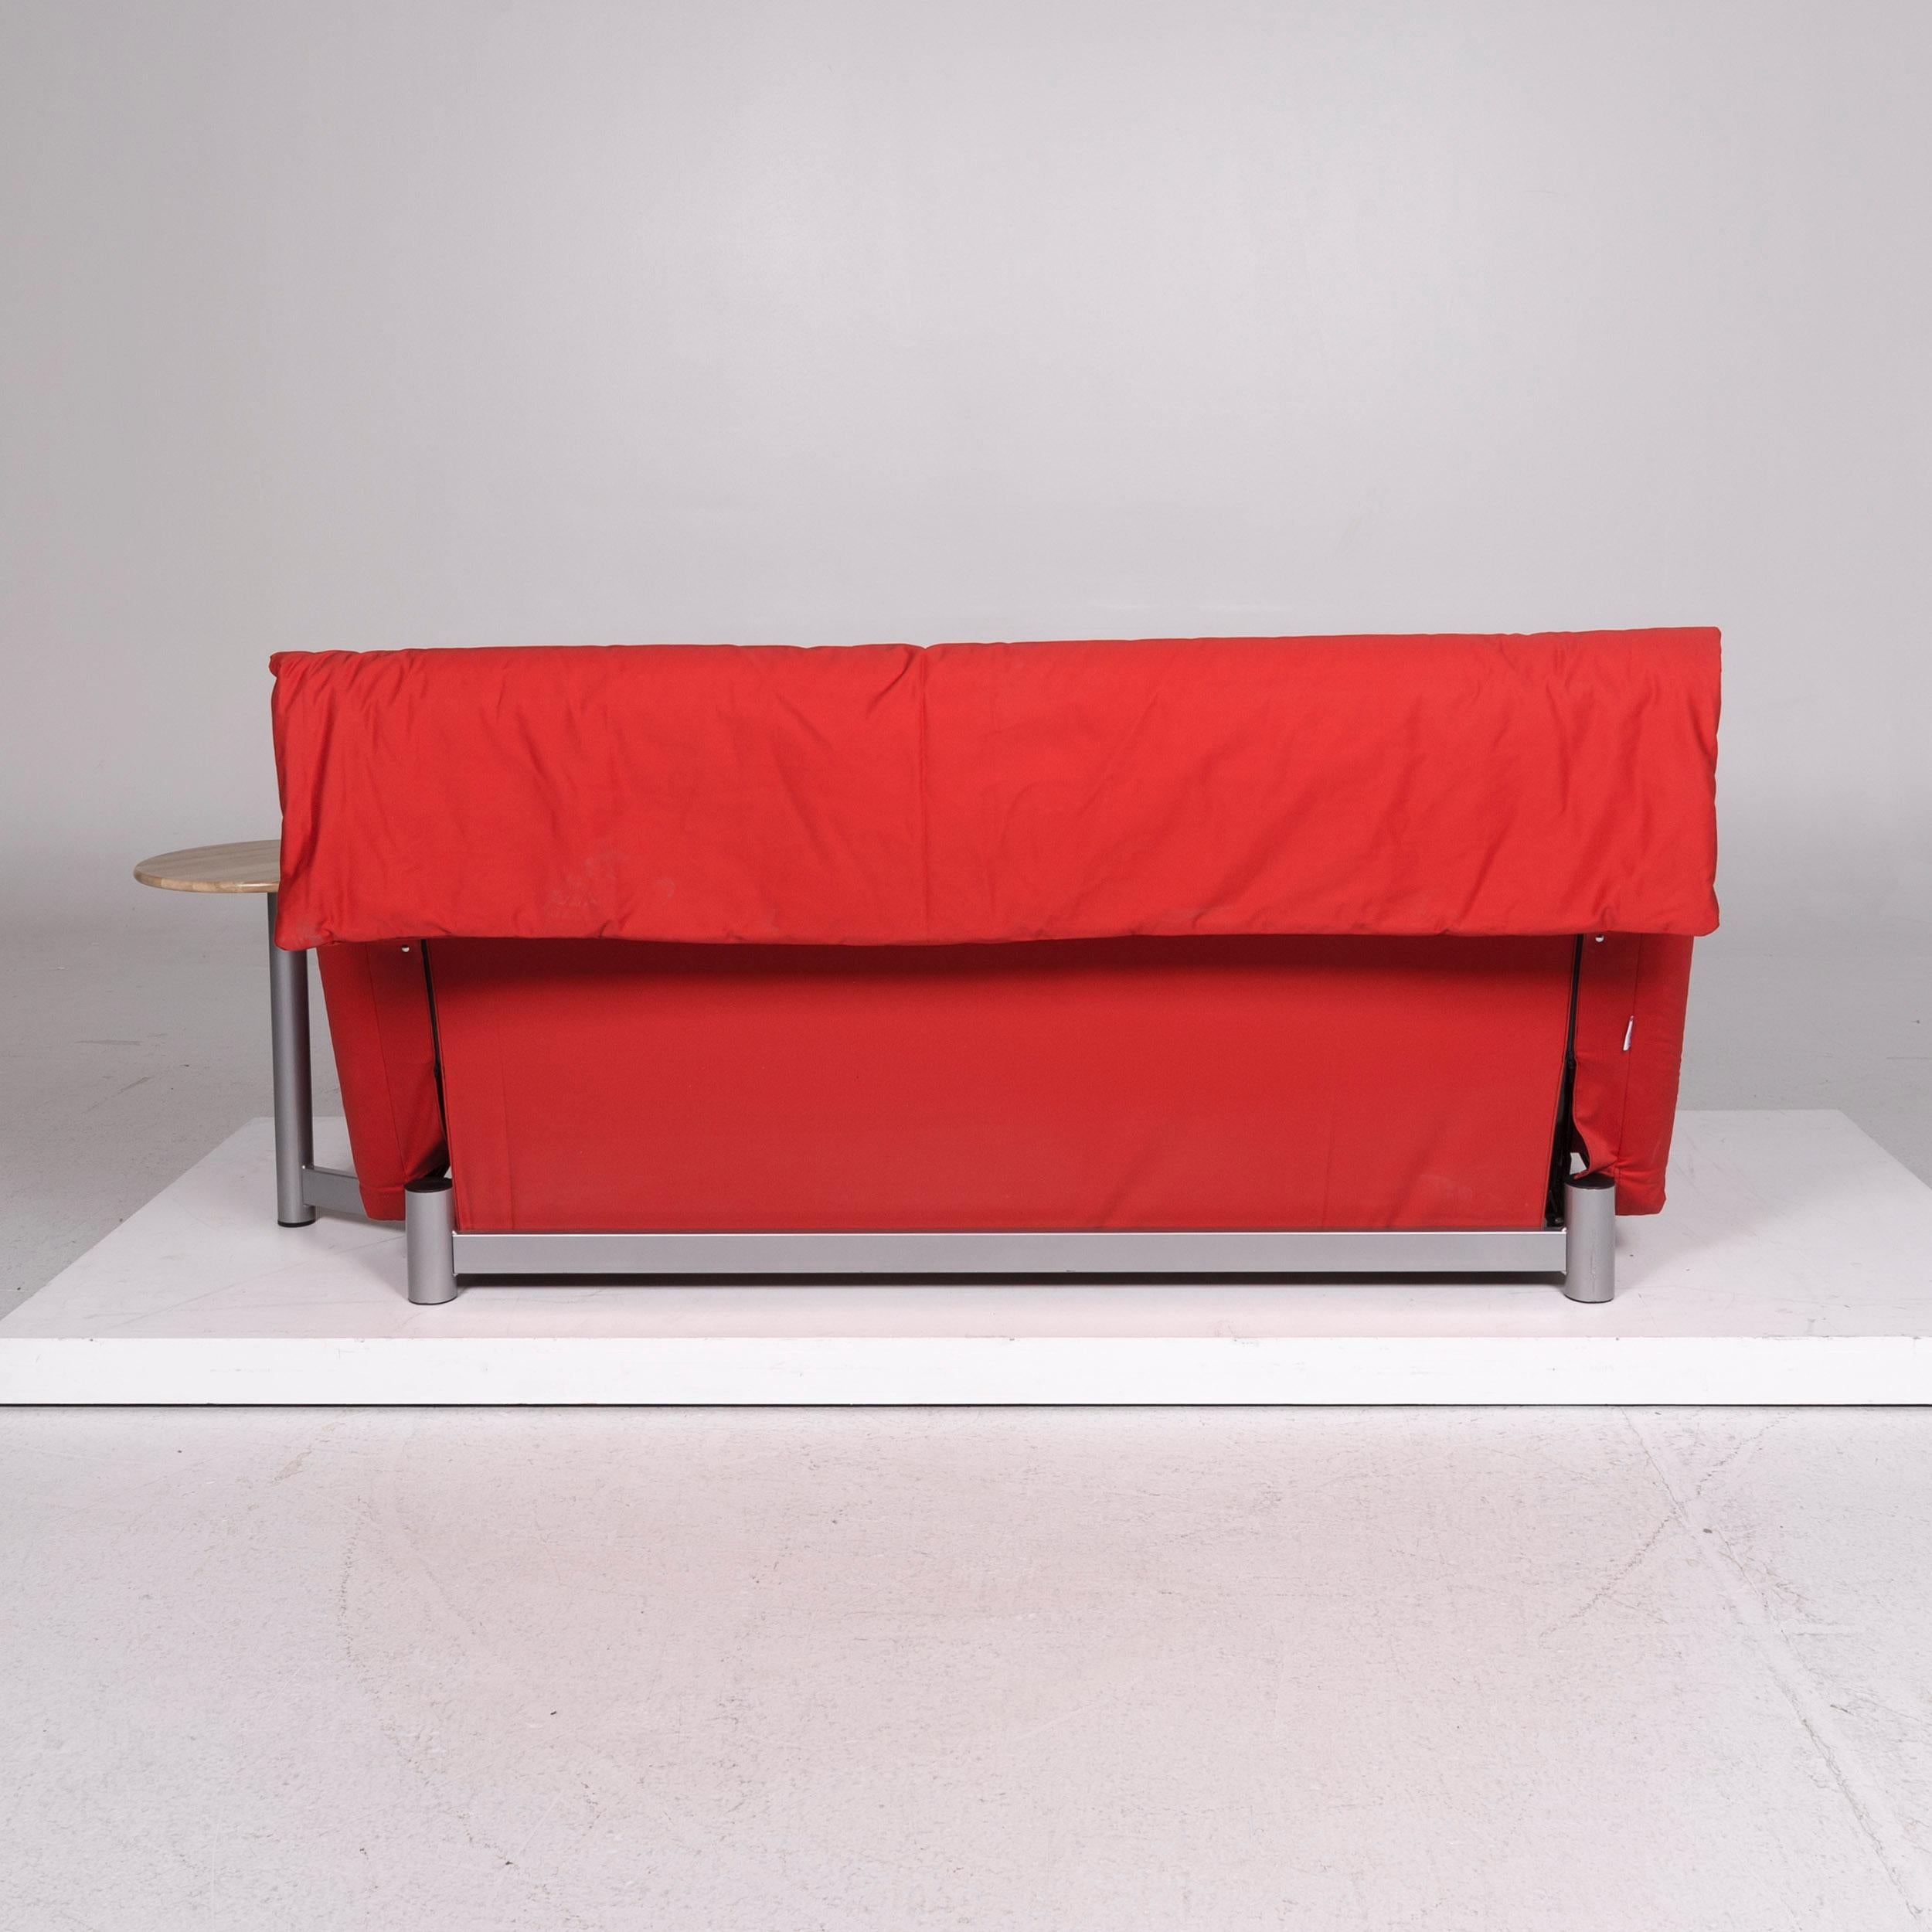 Ligne Roset Multy Fabric Sofa Red Sofa Bed Sleep Function Function Couch 1